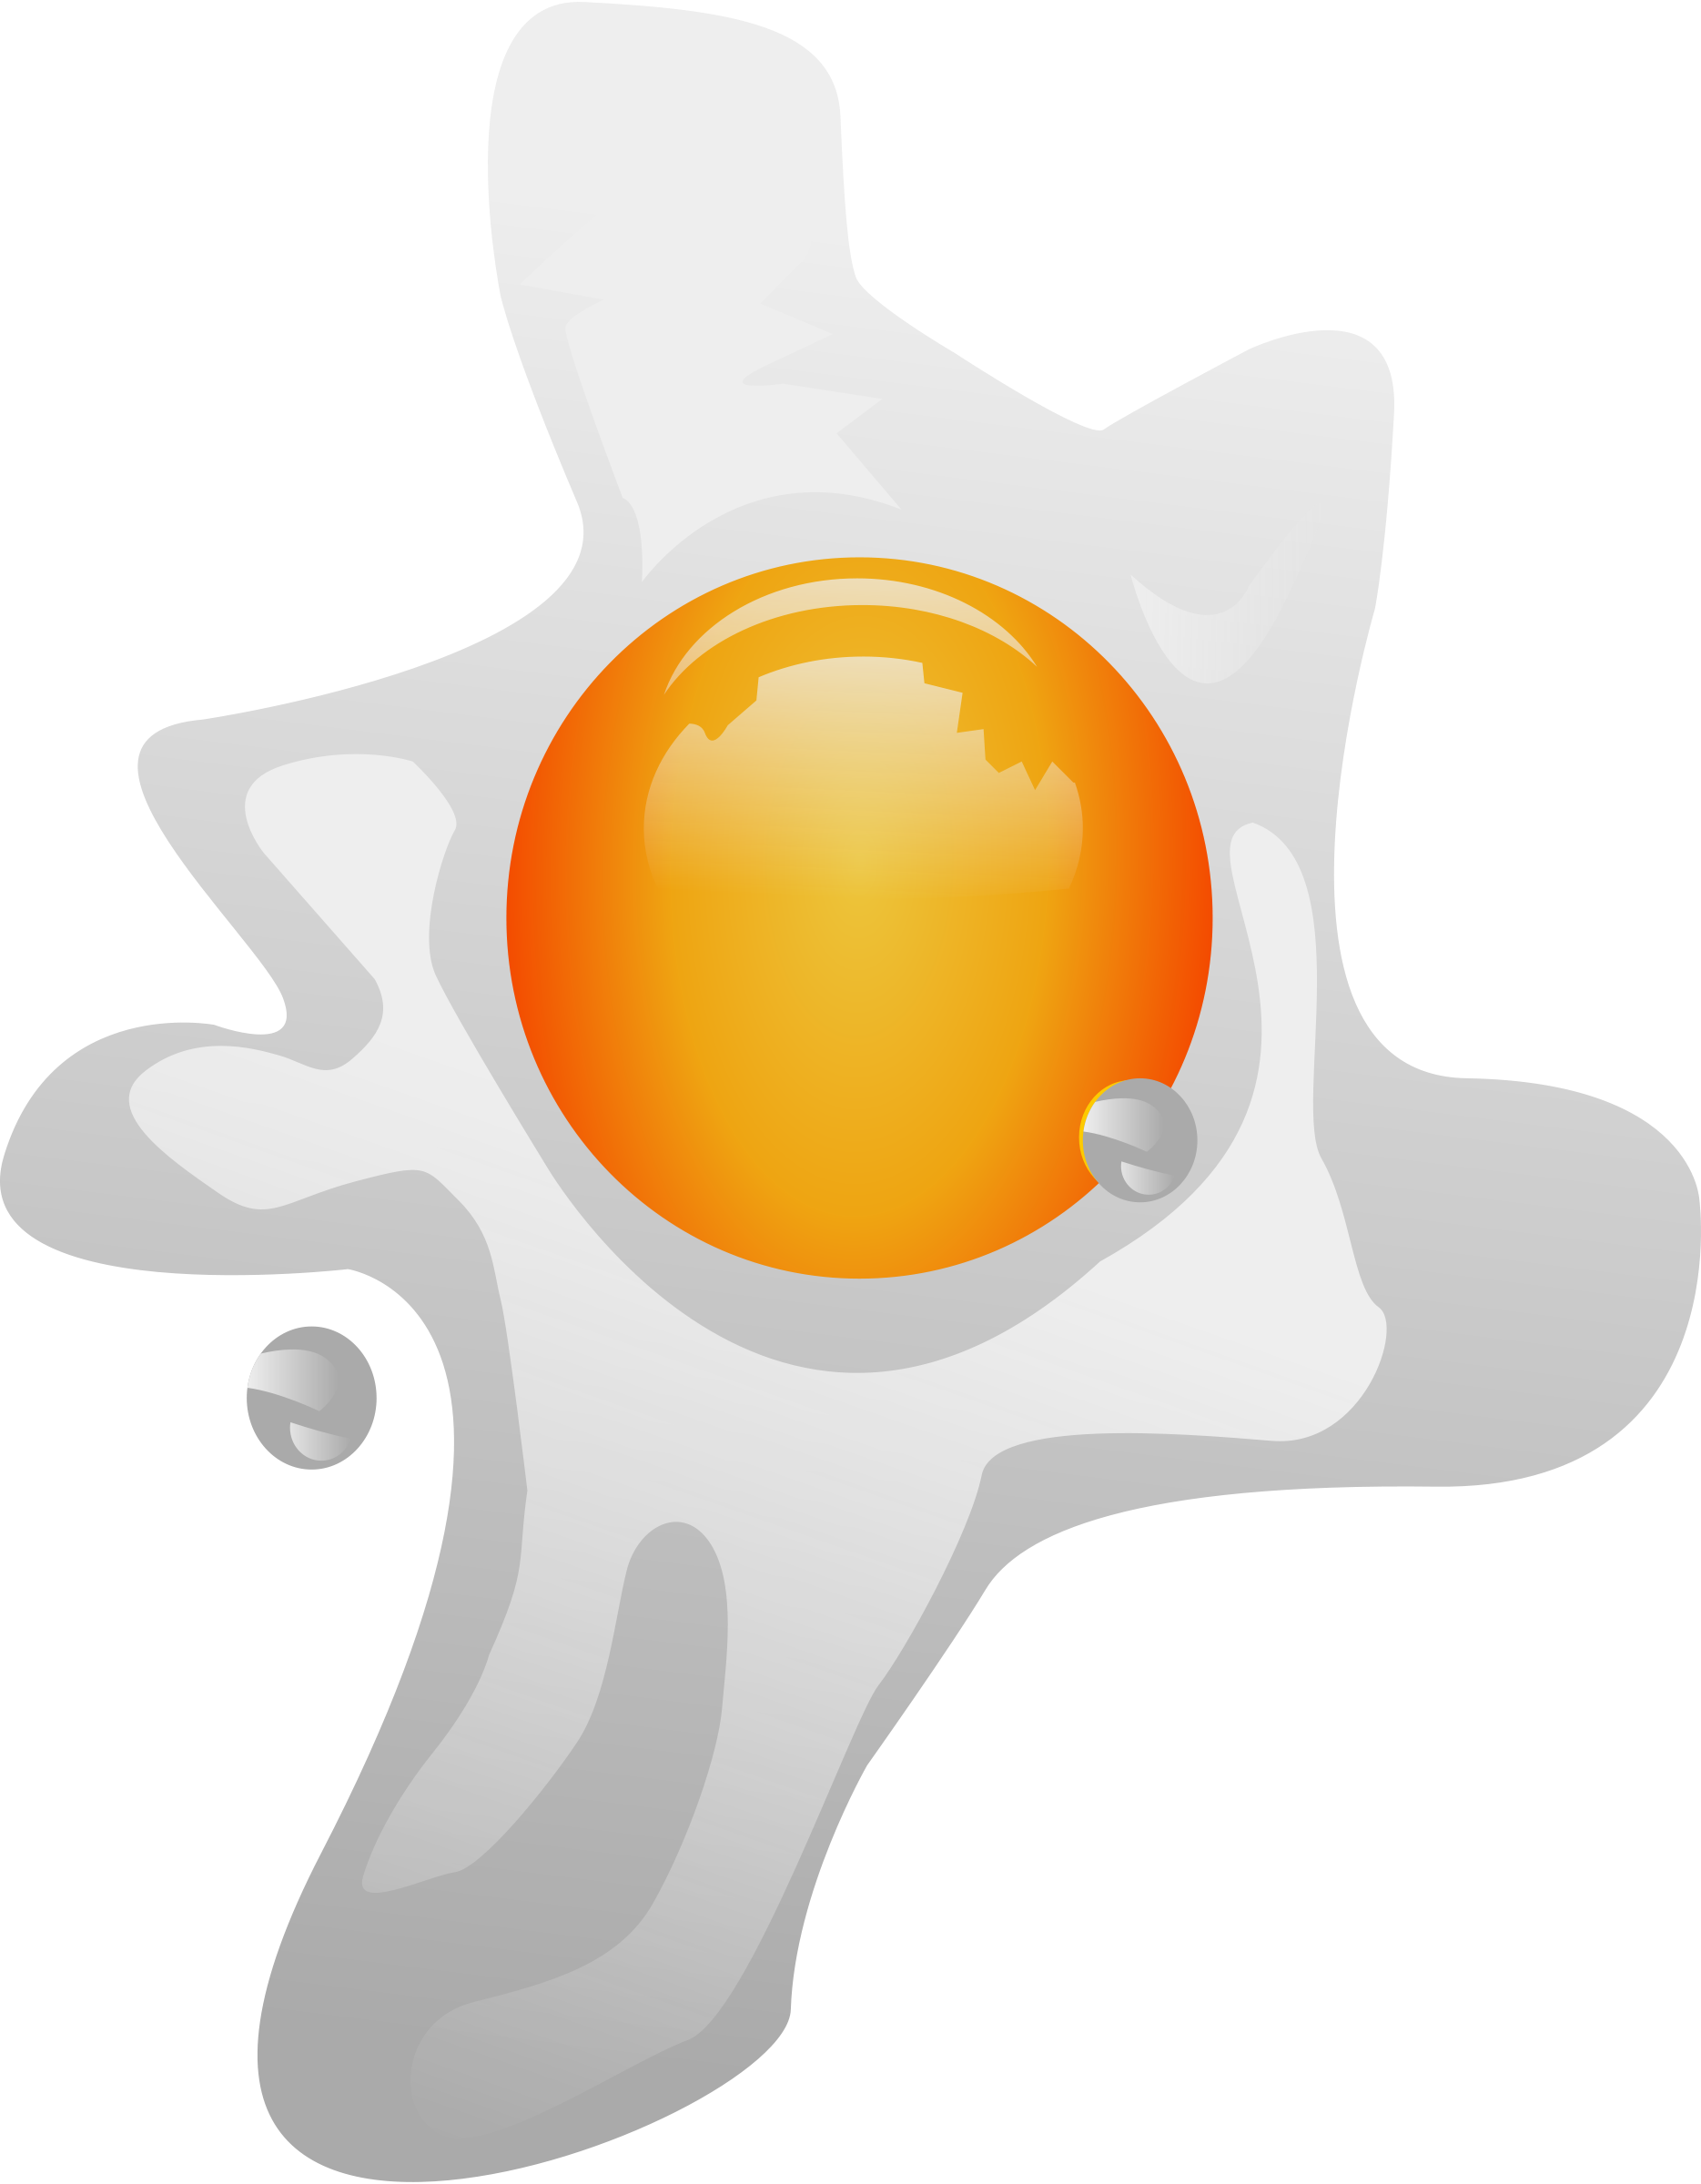 Eggs clipart egg whites. Png transparent images all